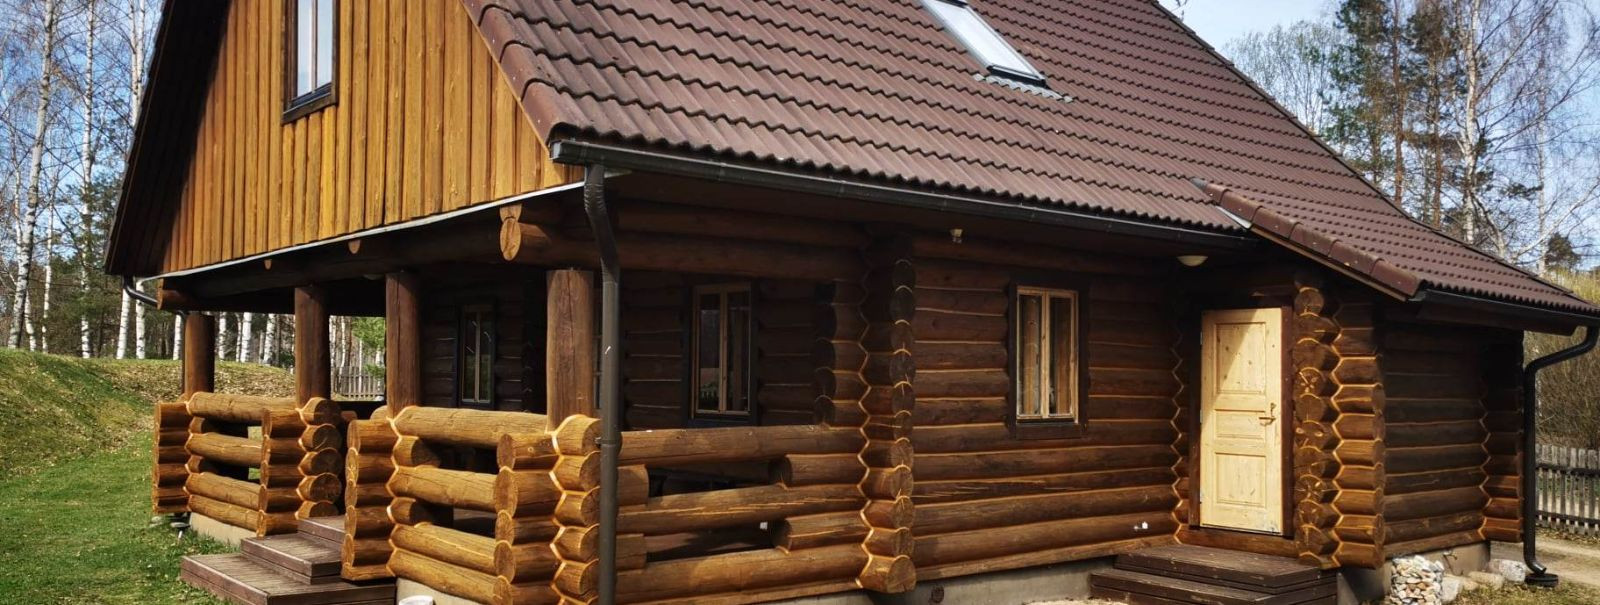 Joint gaps in log houses are a natural occurrence due to the settling and movement of wood over time. These gaps can lead to air infiltration, energy loss, and 